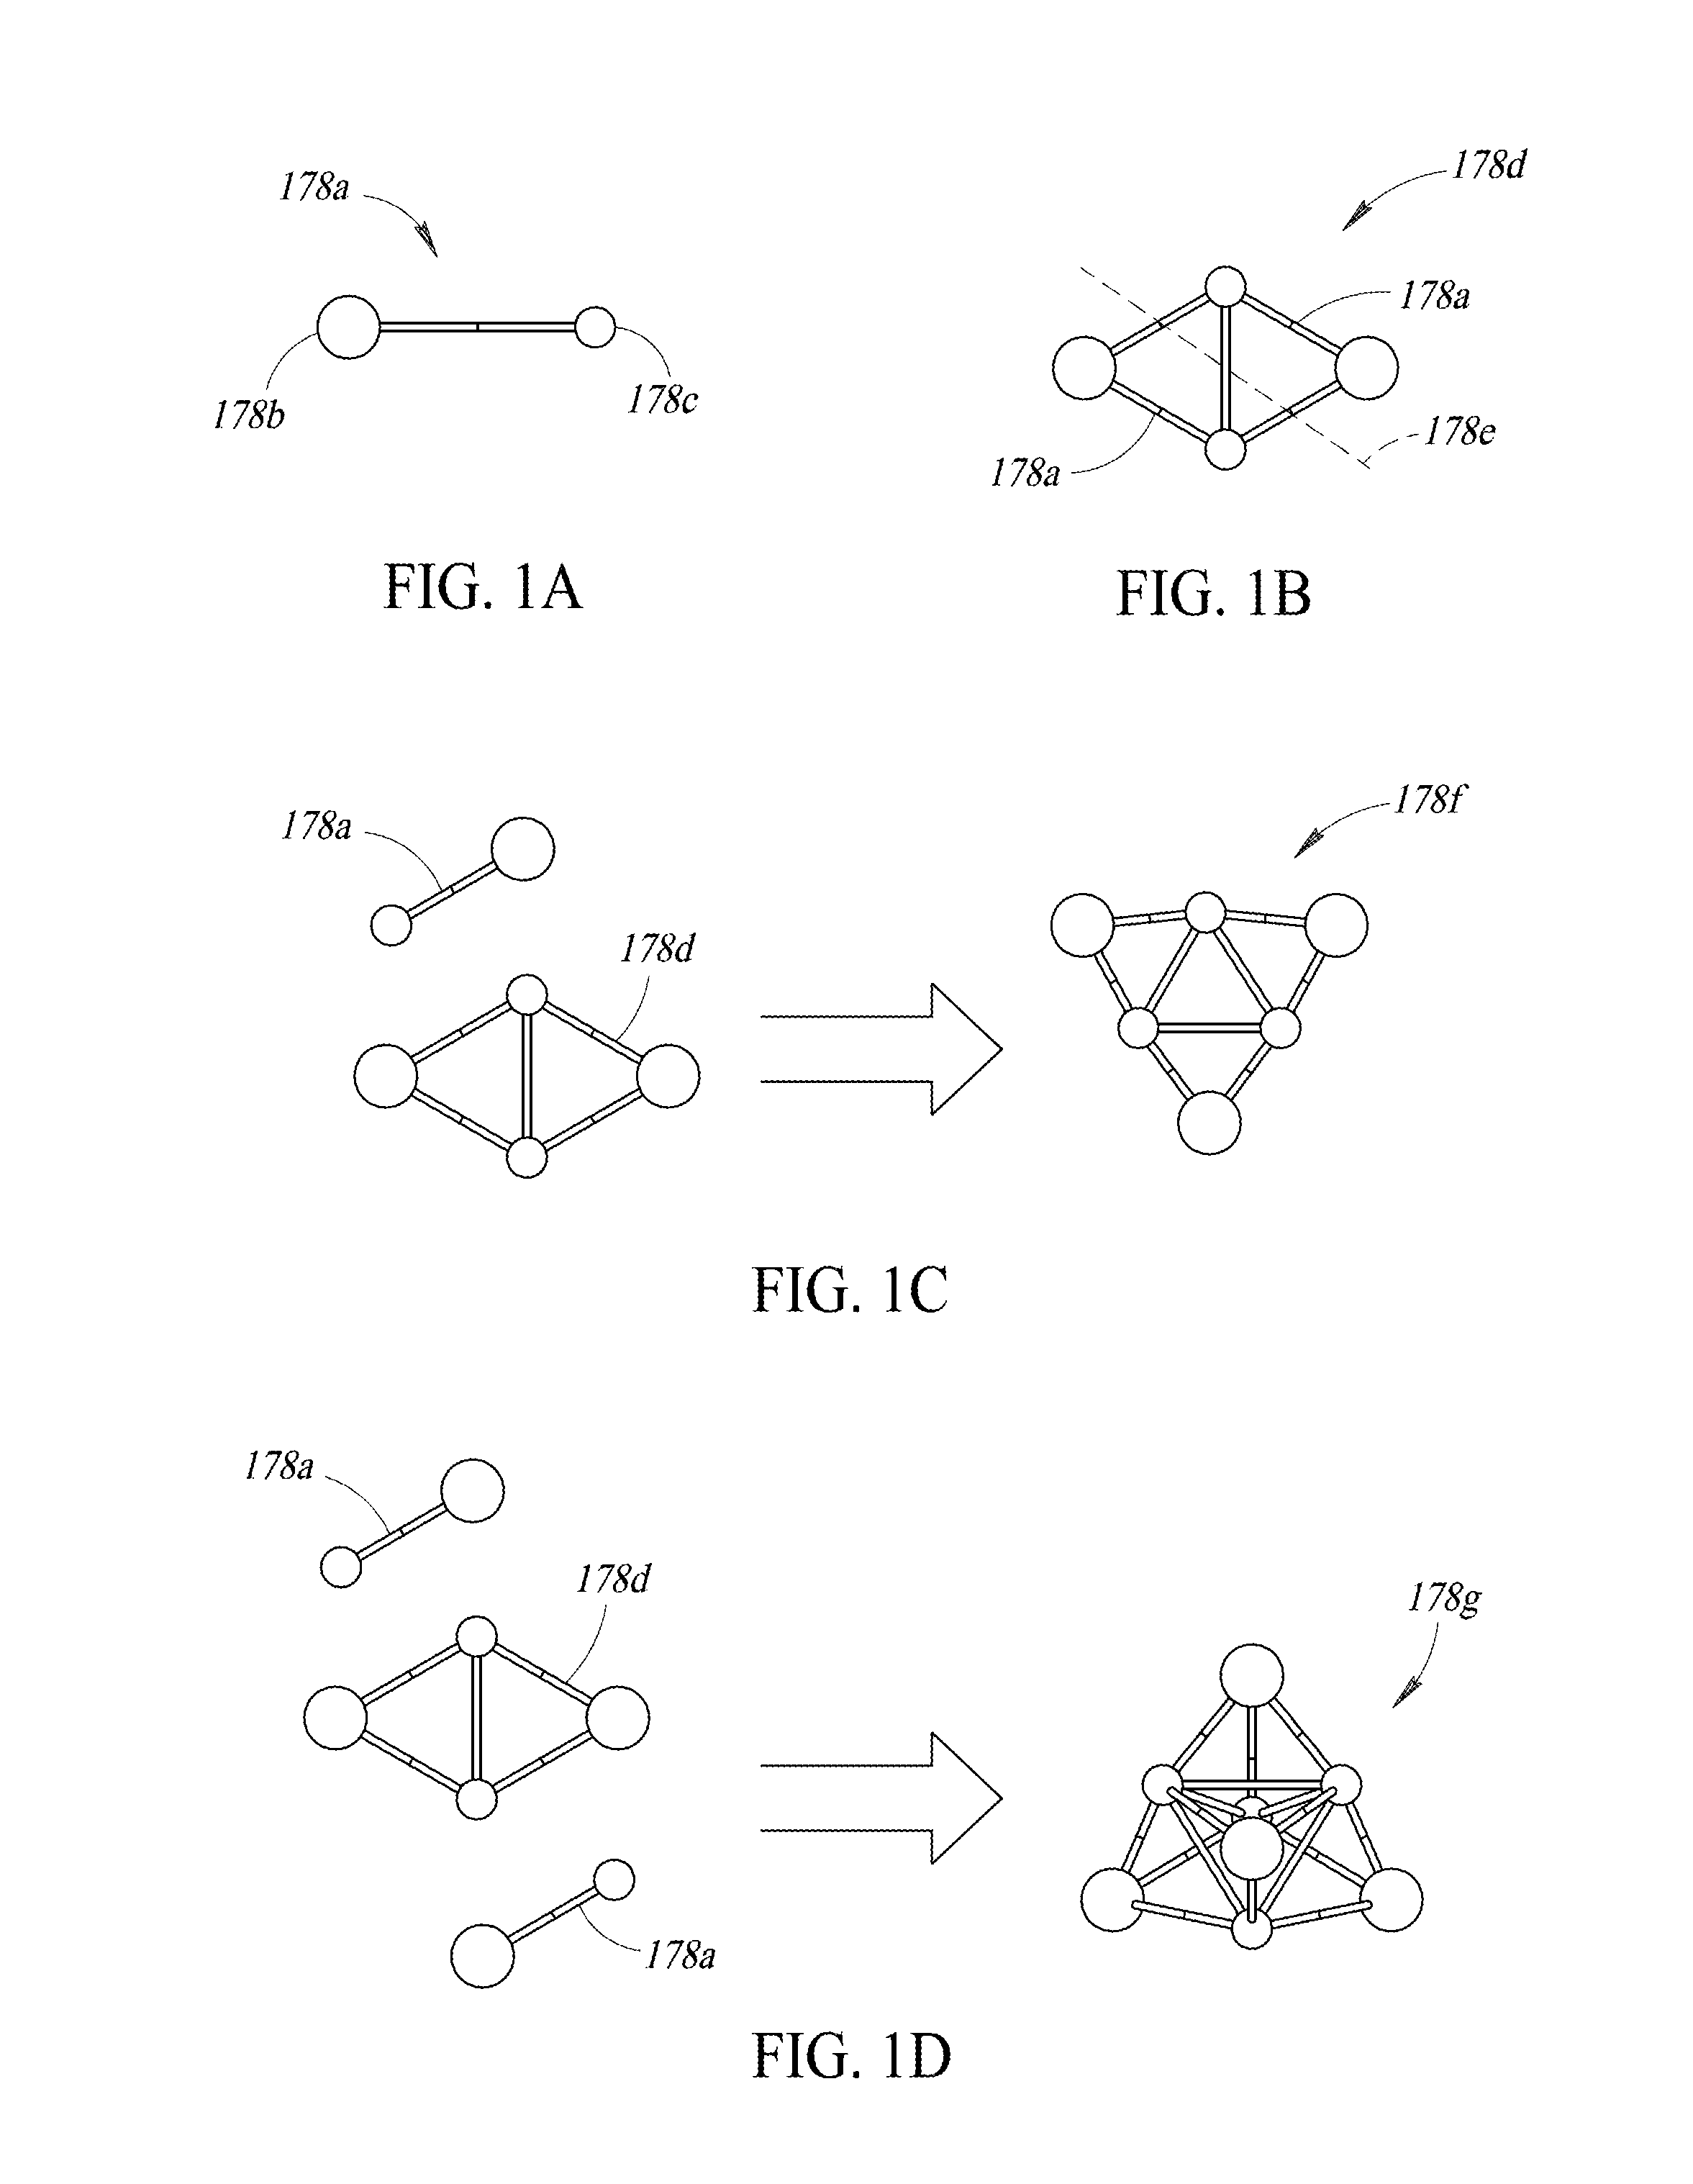 Atomic layer deposition of selected molecular clusters